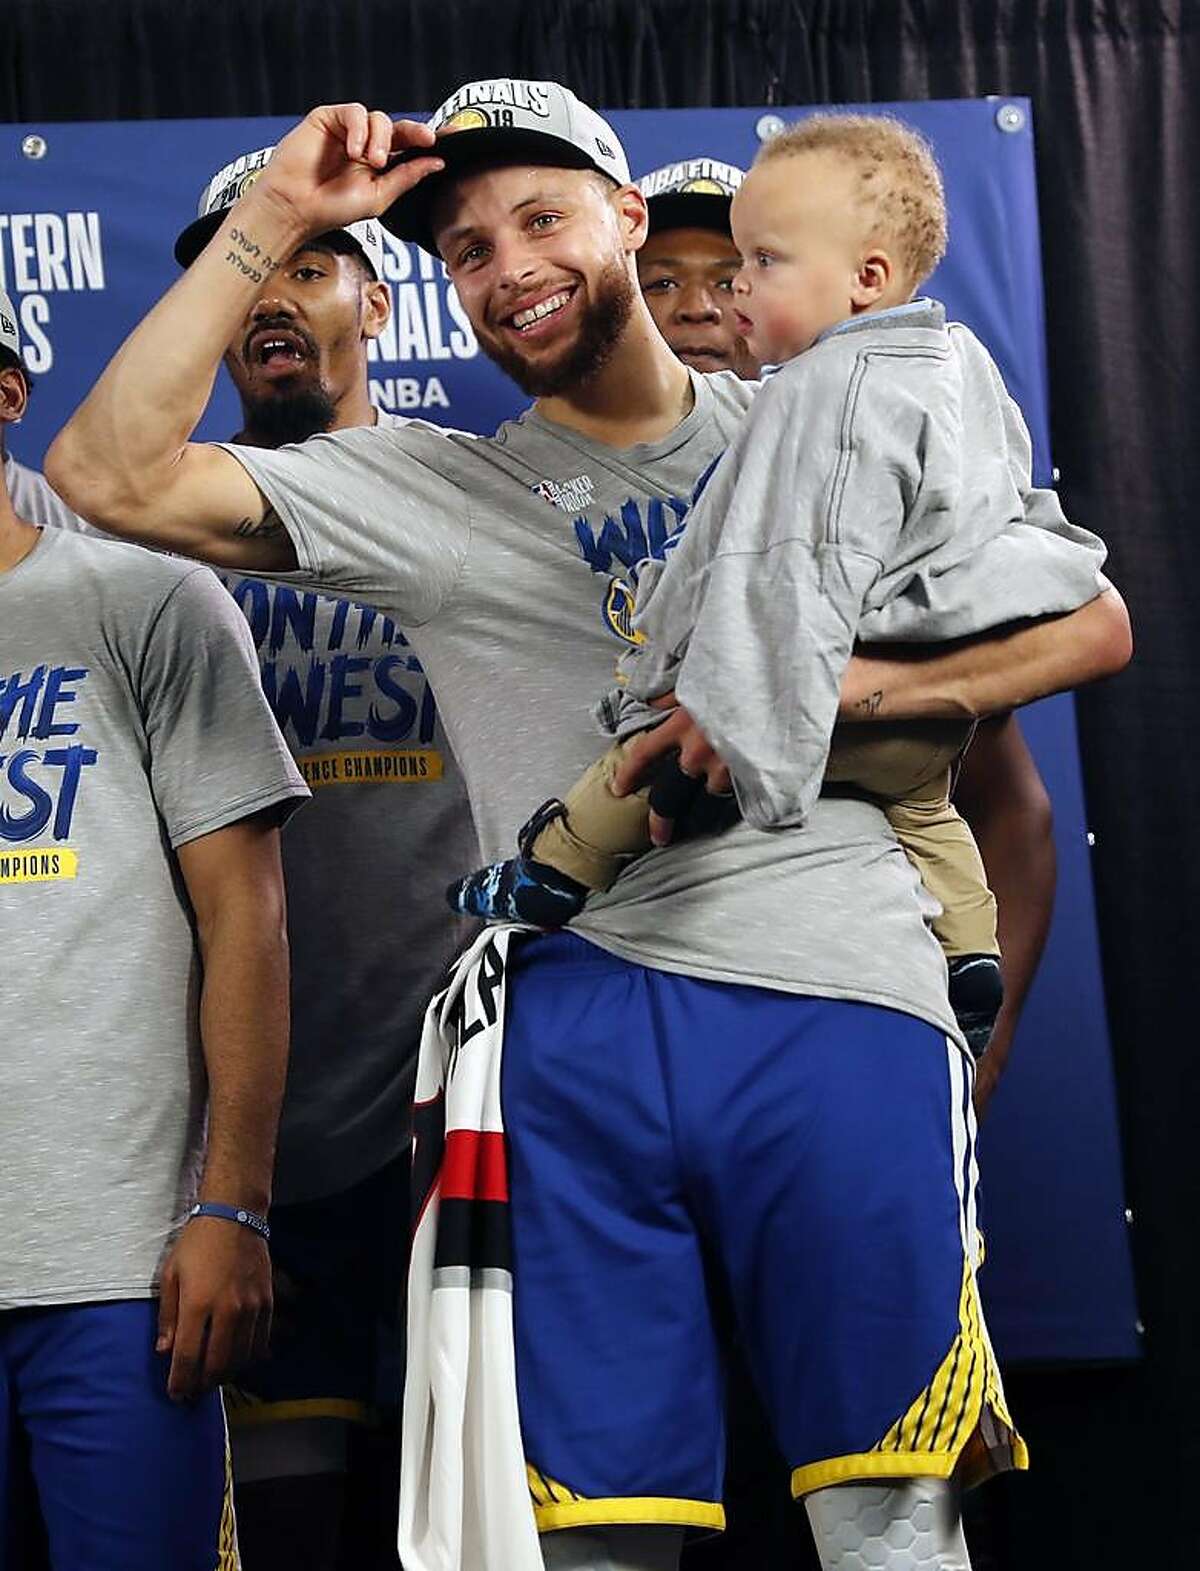 Golden State Warriors' Stephen Curry with son, Canon, after 119-117 overtime win over Portland Trail Blazers' in NBA Western Conference Finals' Game 4 at Moda Center in Portland, Oregon on Monday, May 20, 2019.